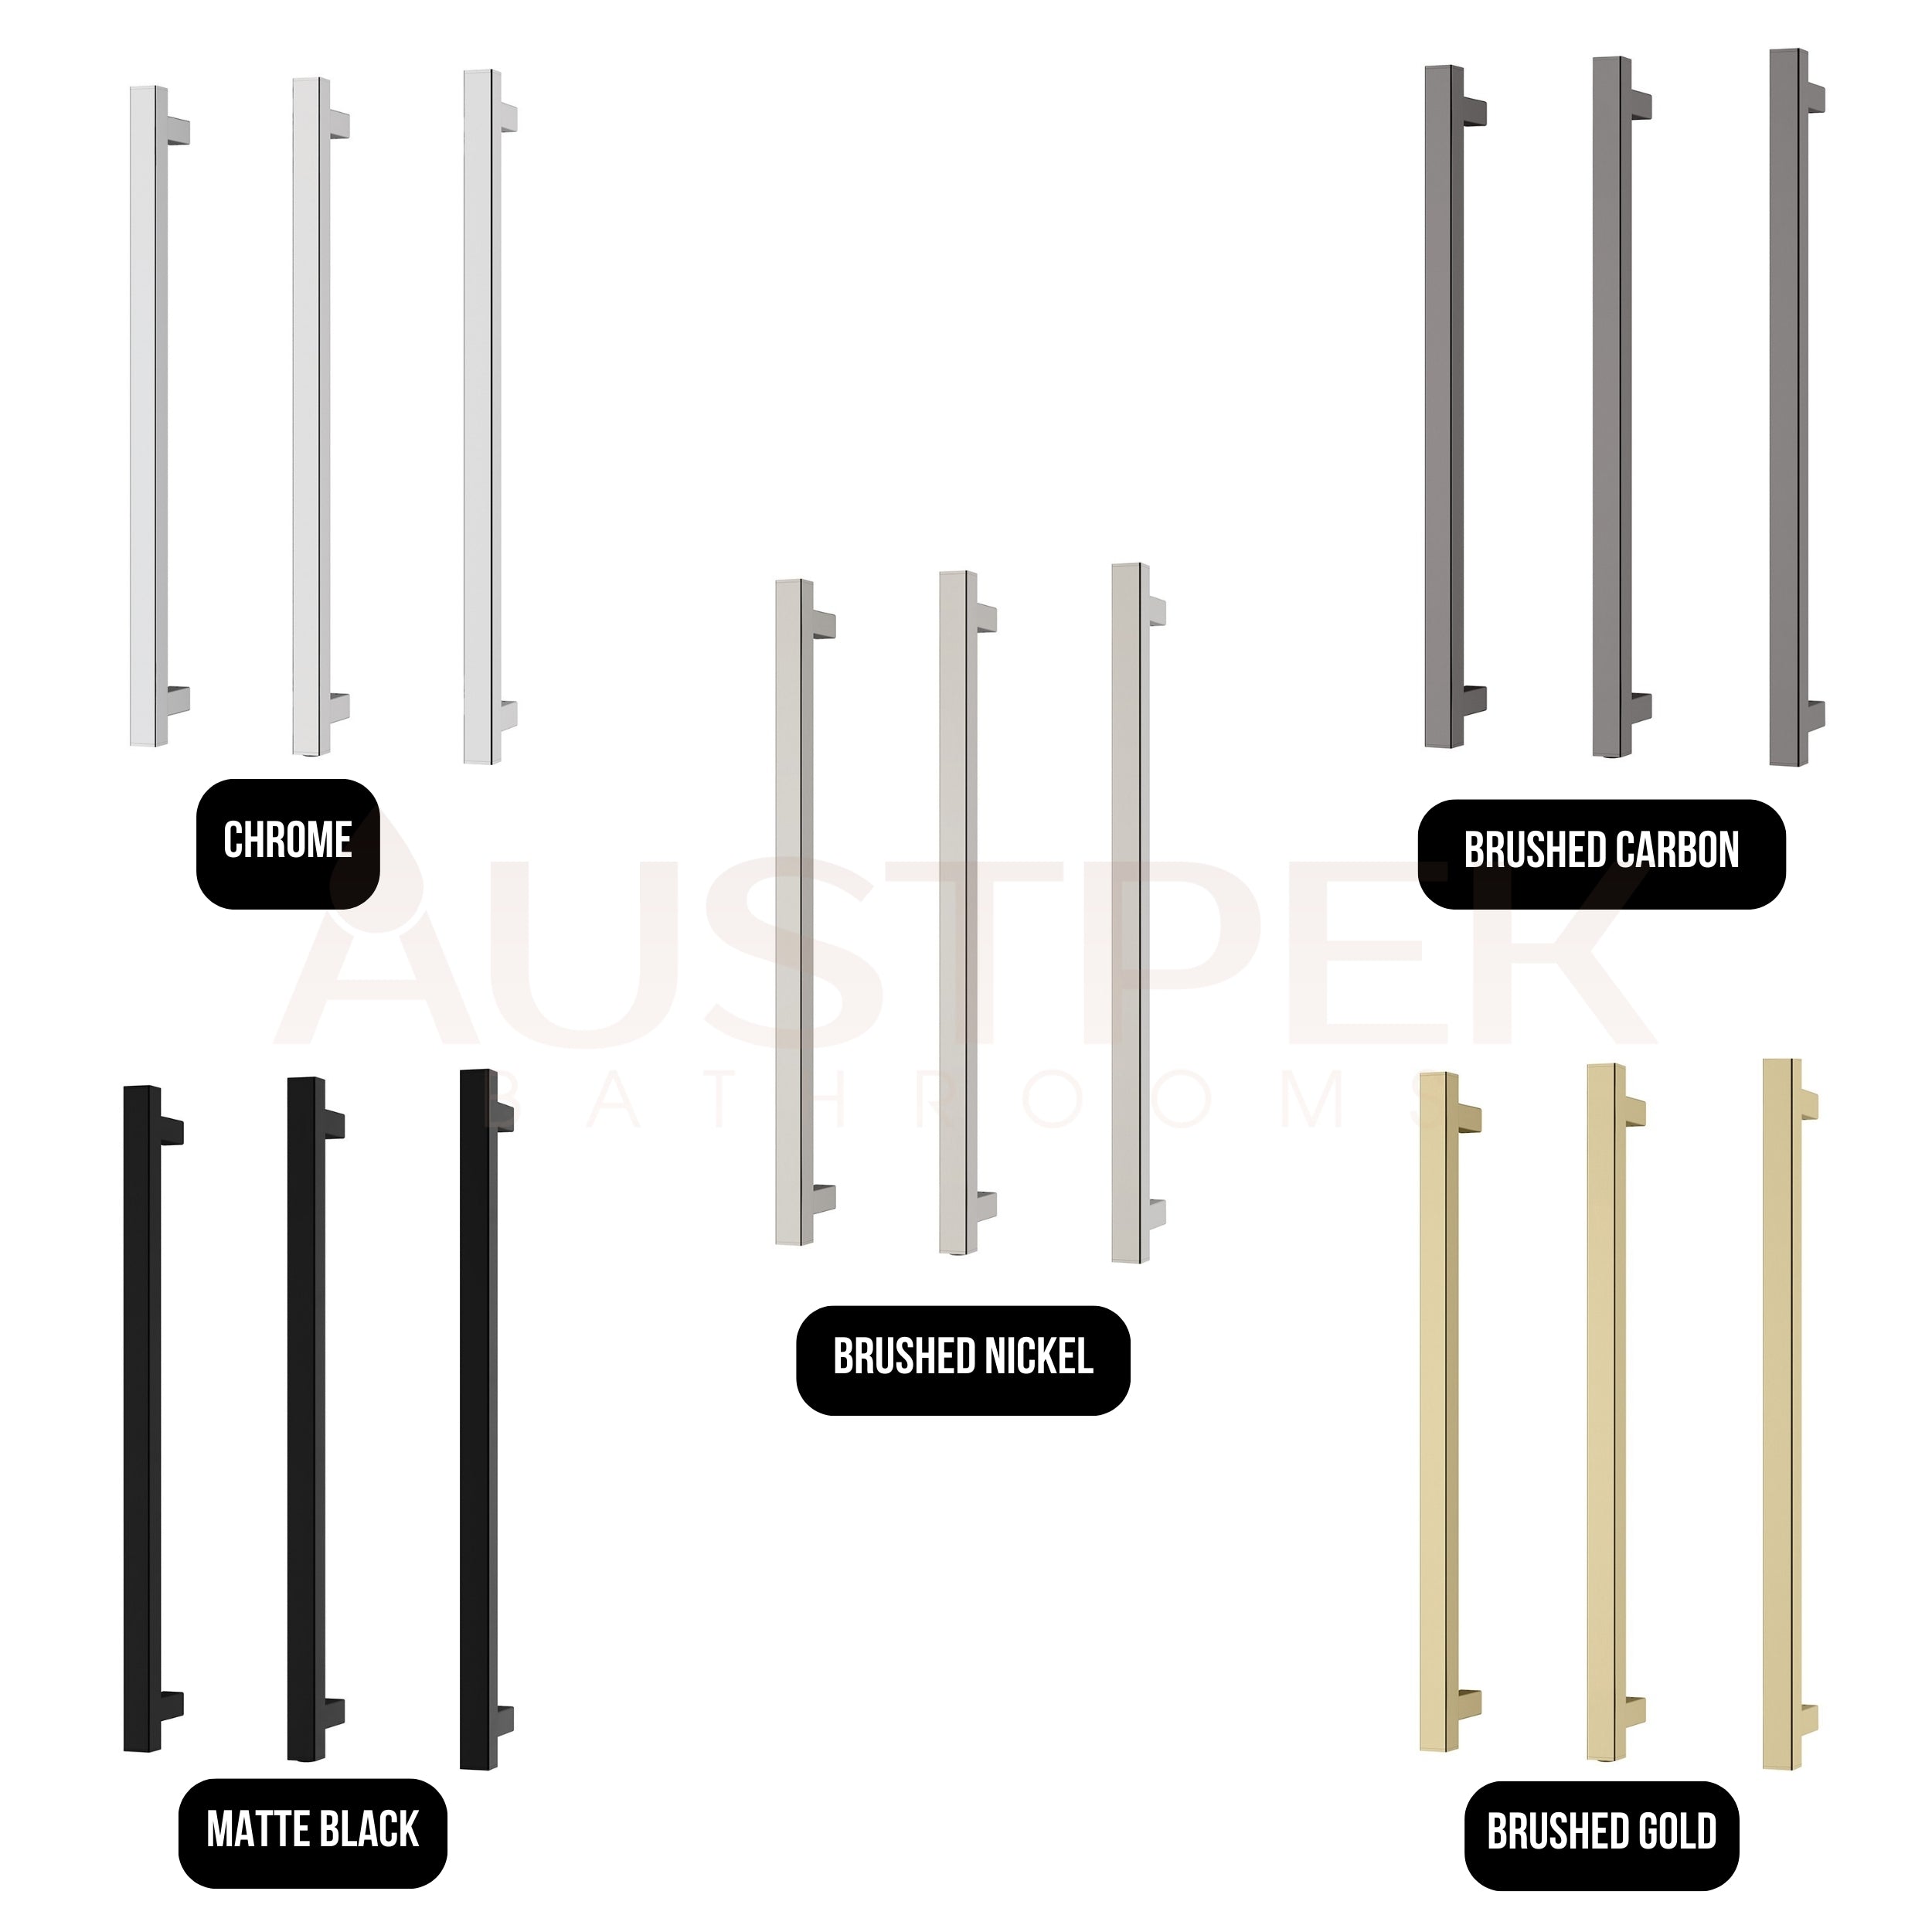 PHOENIX SQUARE TRIPLE HEATED TOWEL RAIL BRUSHED GOLD (AVAILABLE IN 600MM AND 800MM)